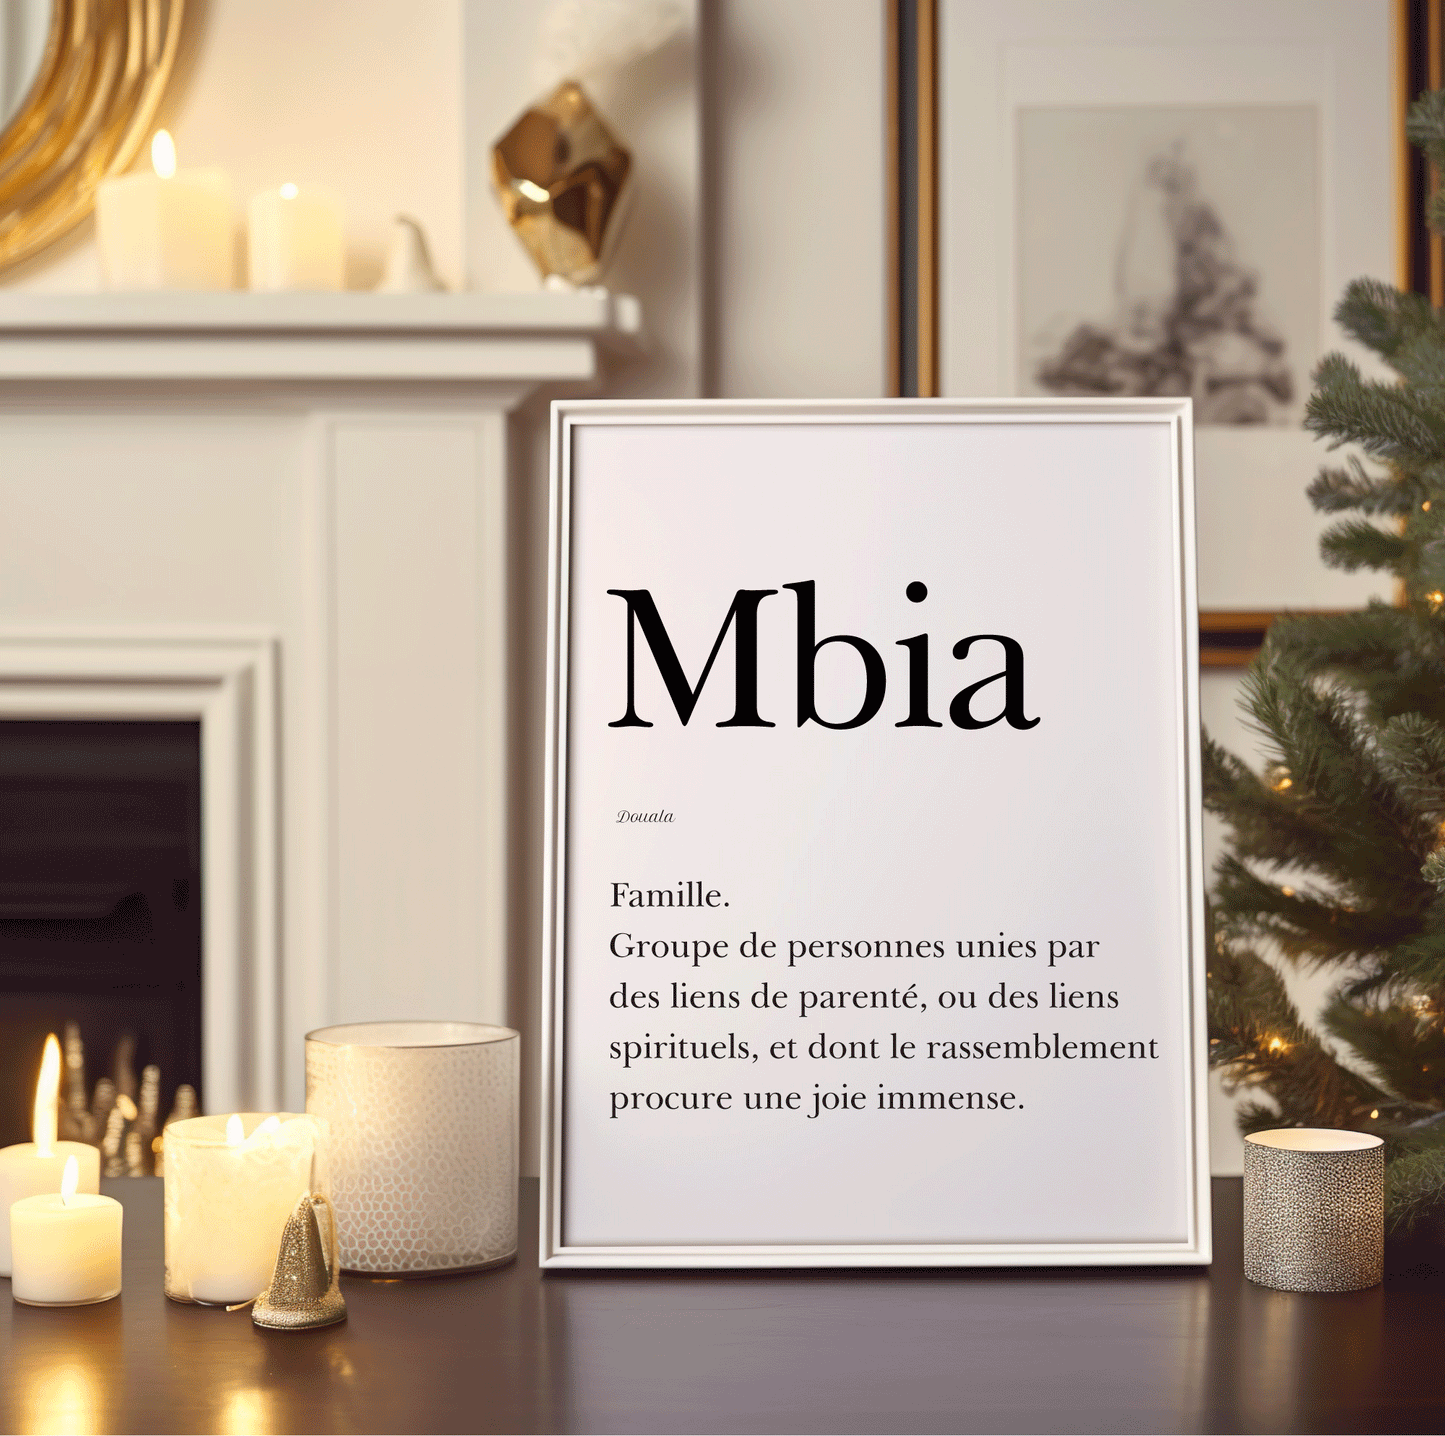 Family in Duala - "Mbia" poster